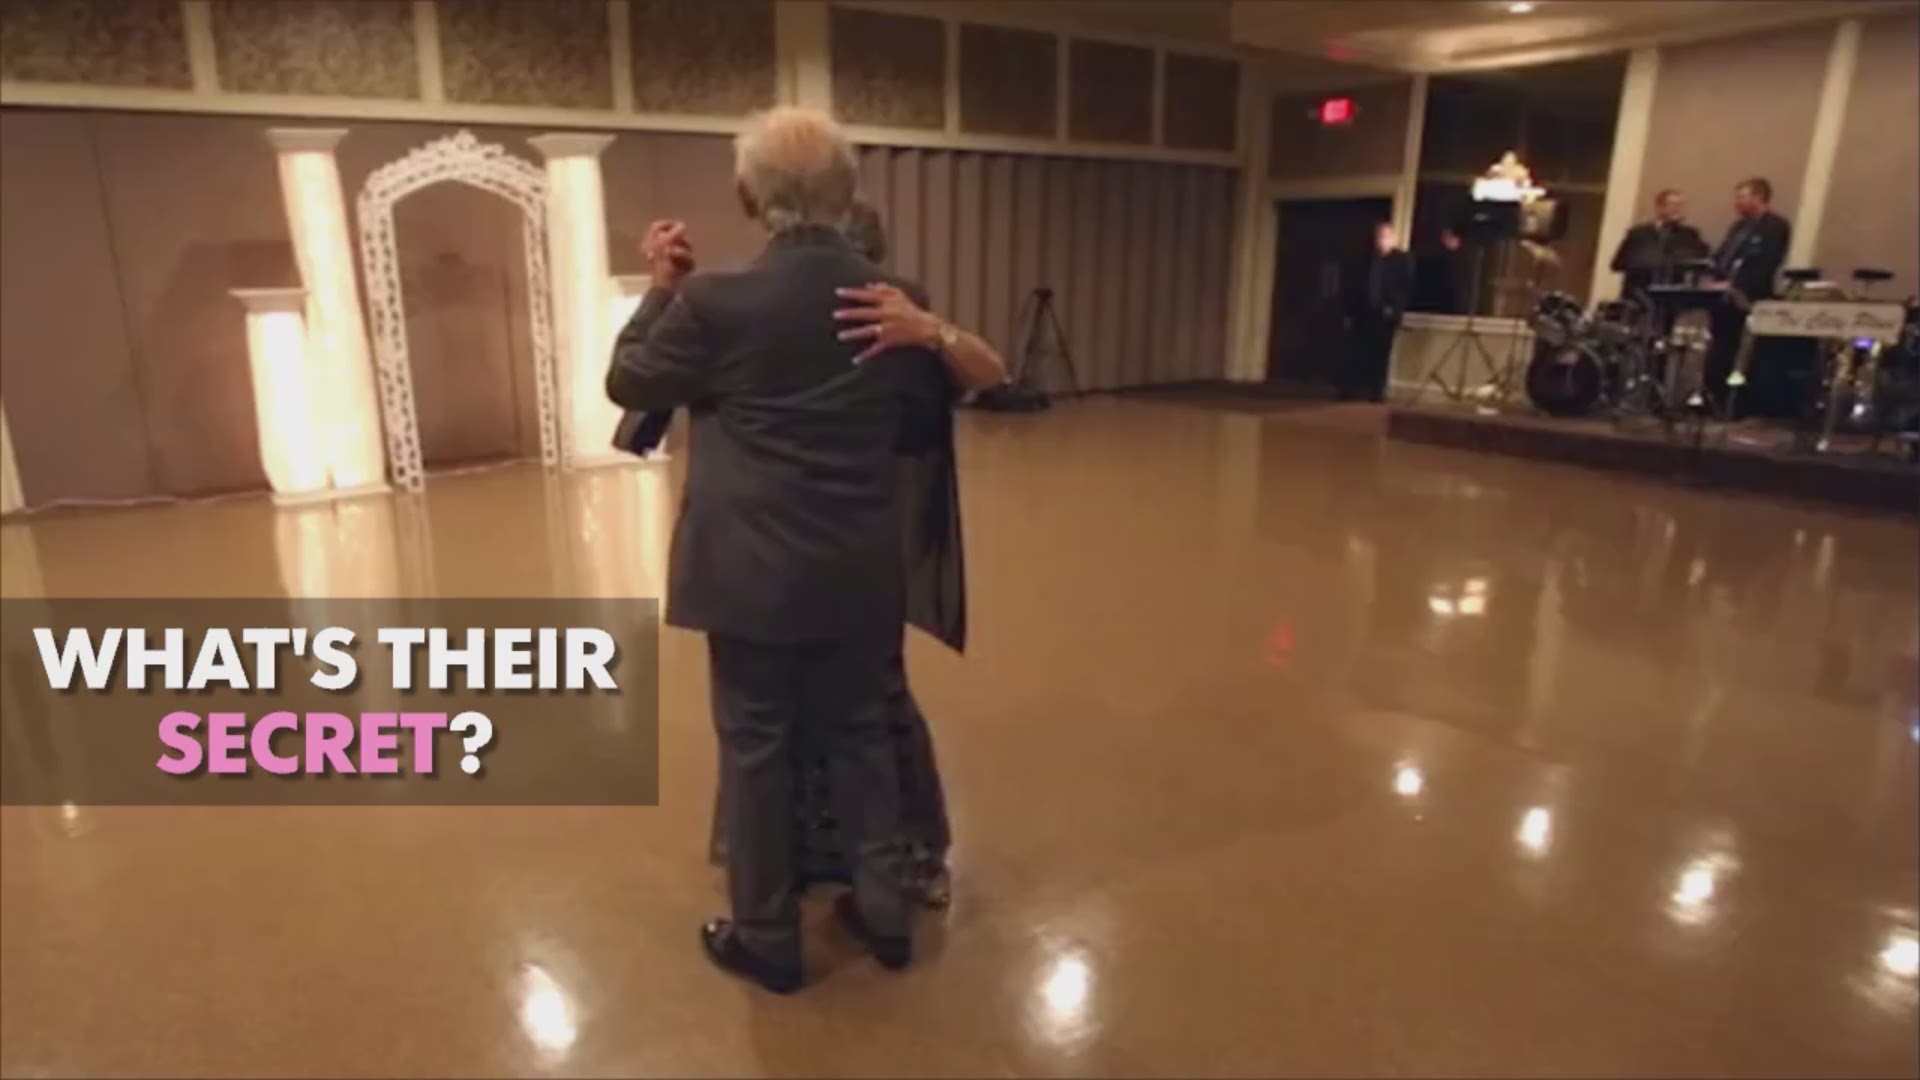 Only 1% of marriages ever make it to the 70th wedding anniversary. Sophia George, 88 and her husband Tony George, 93 talk about how they've lasted so long and they renew their vows in front of others. Eric Seals/Detroit Free Press